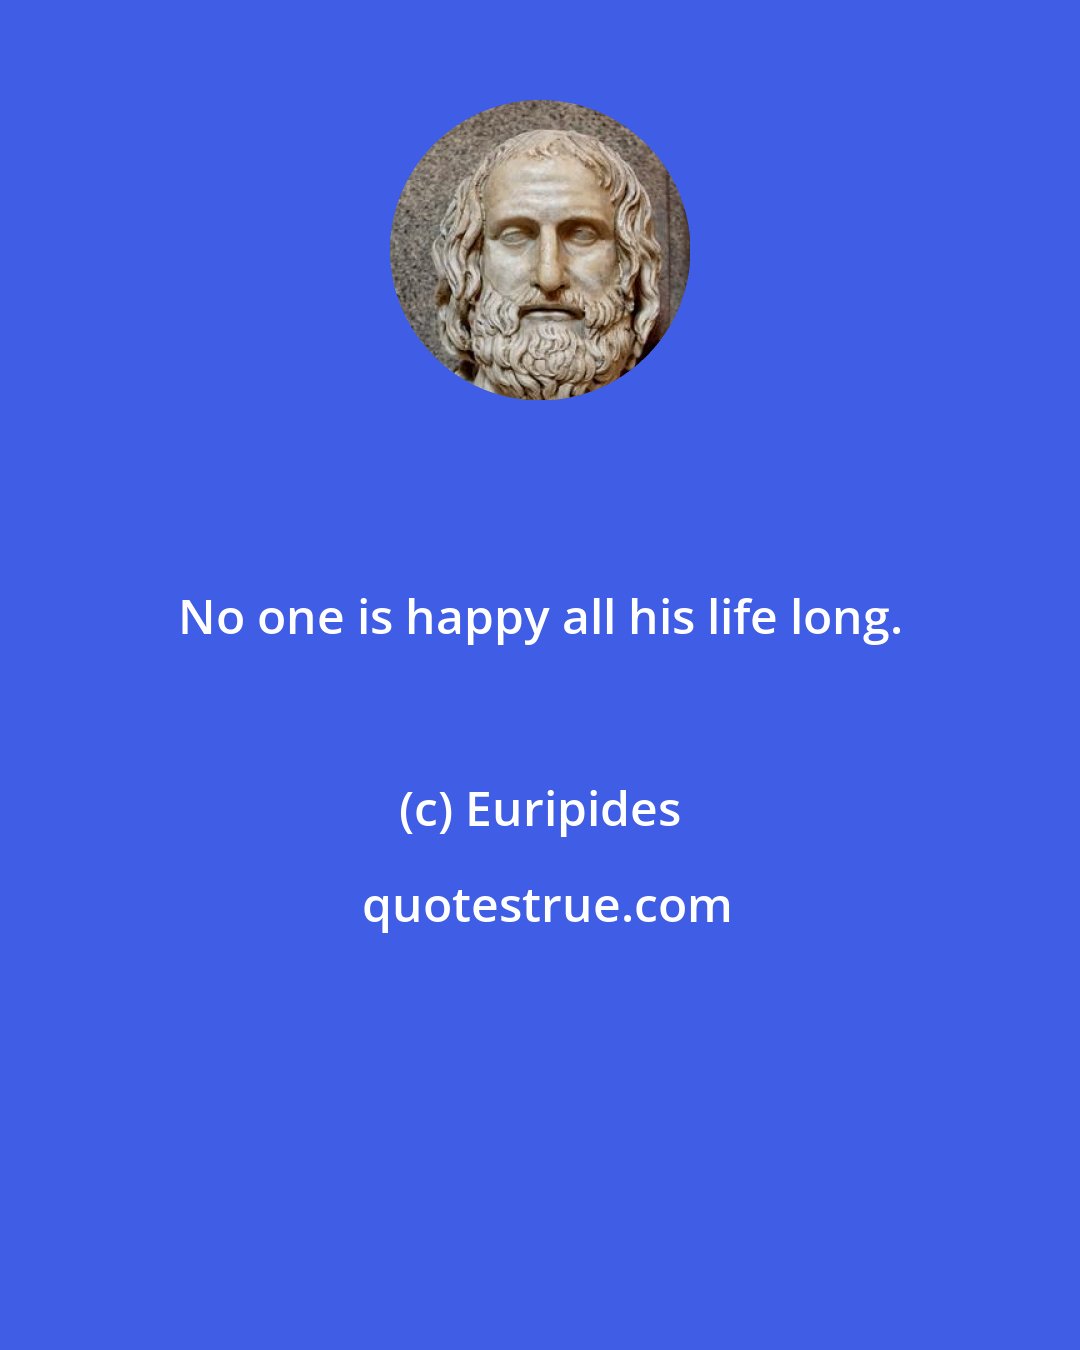 Euripides: No one is happy all his life long.